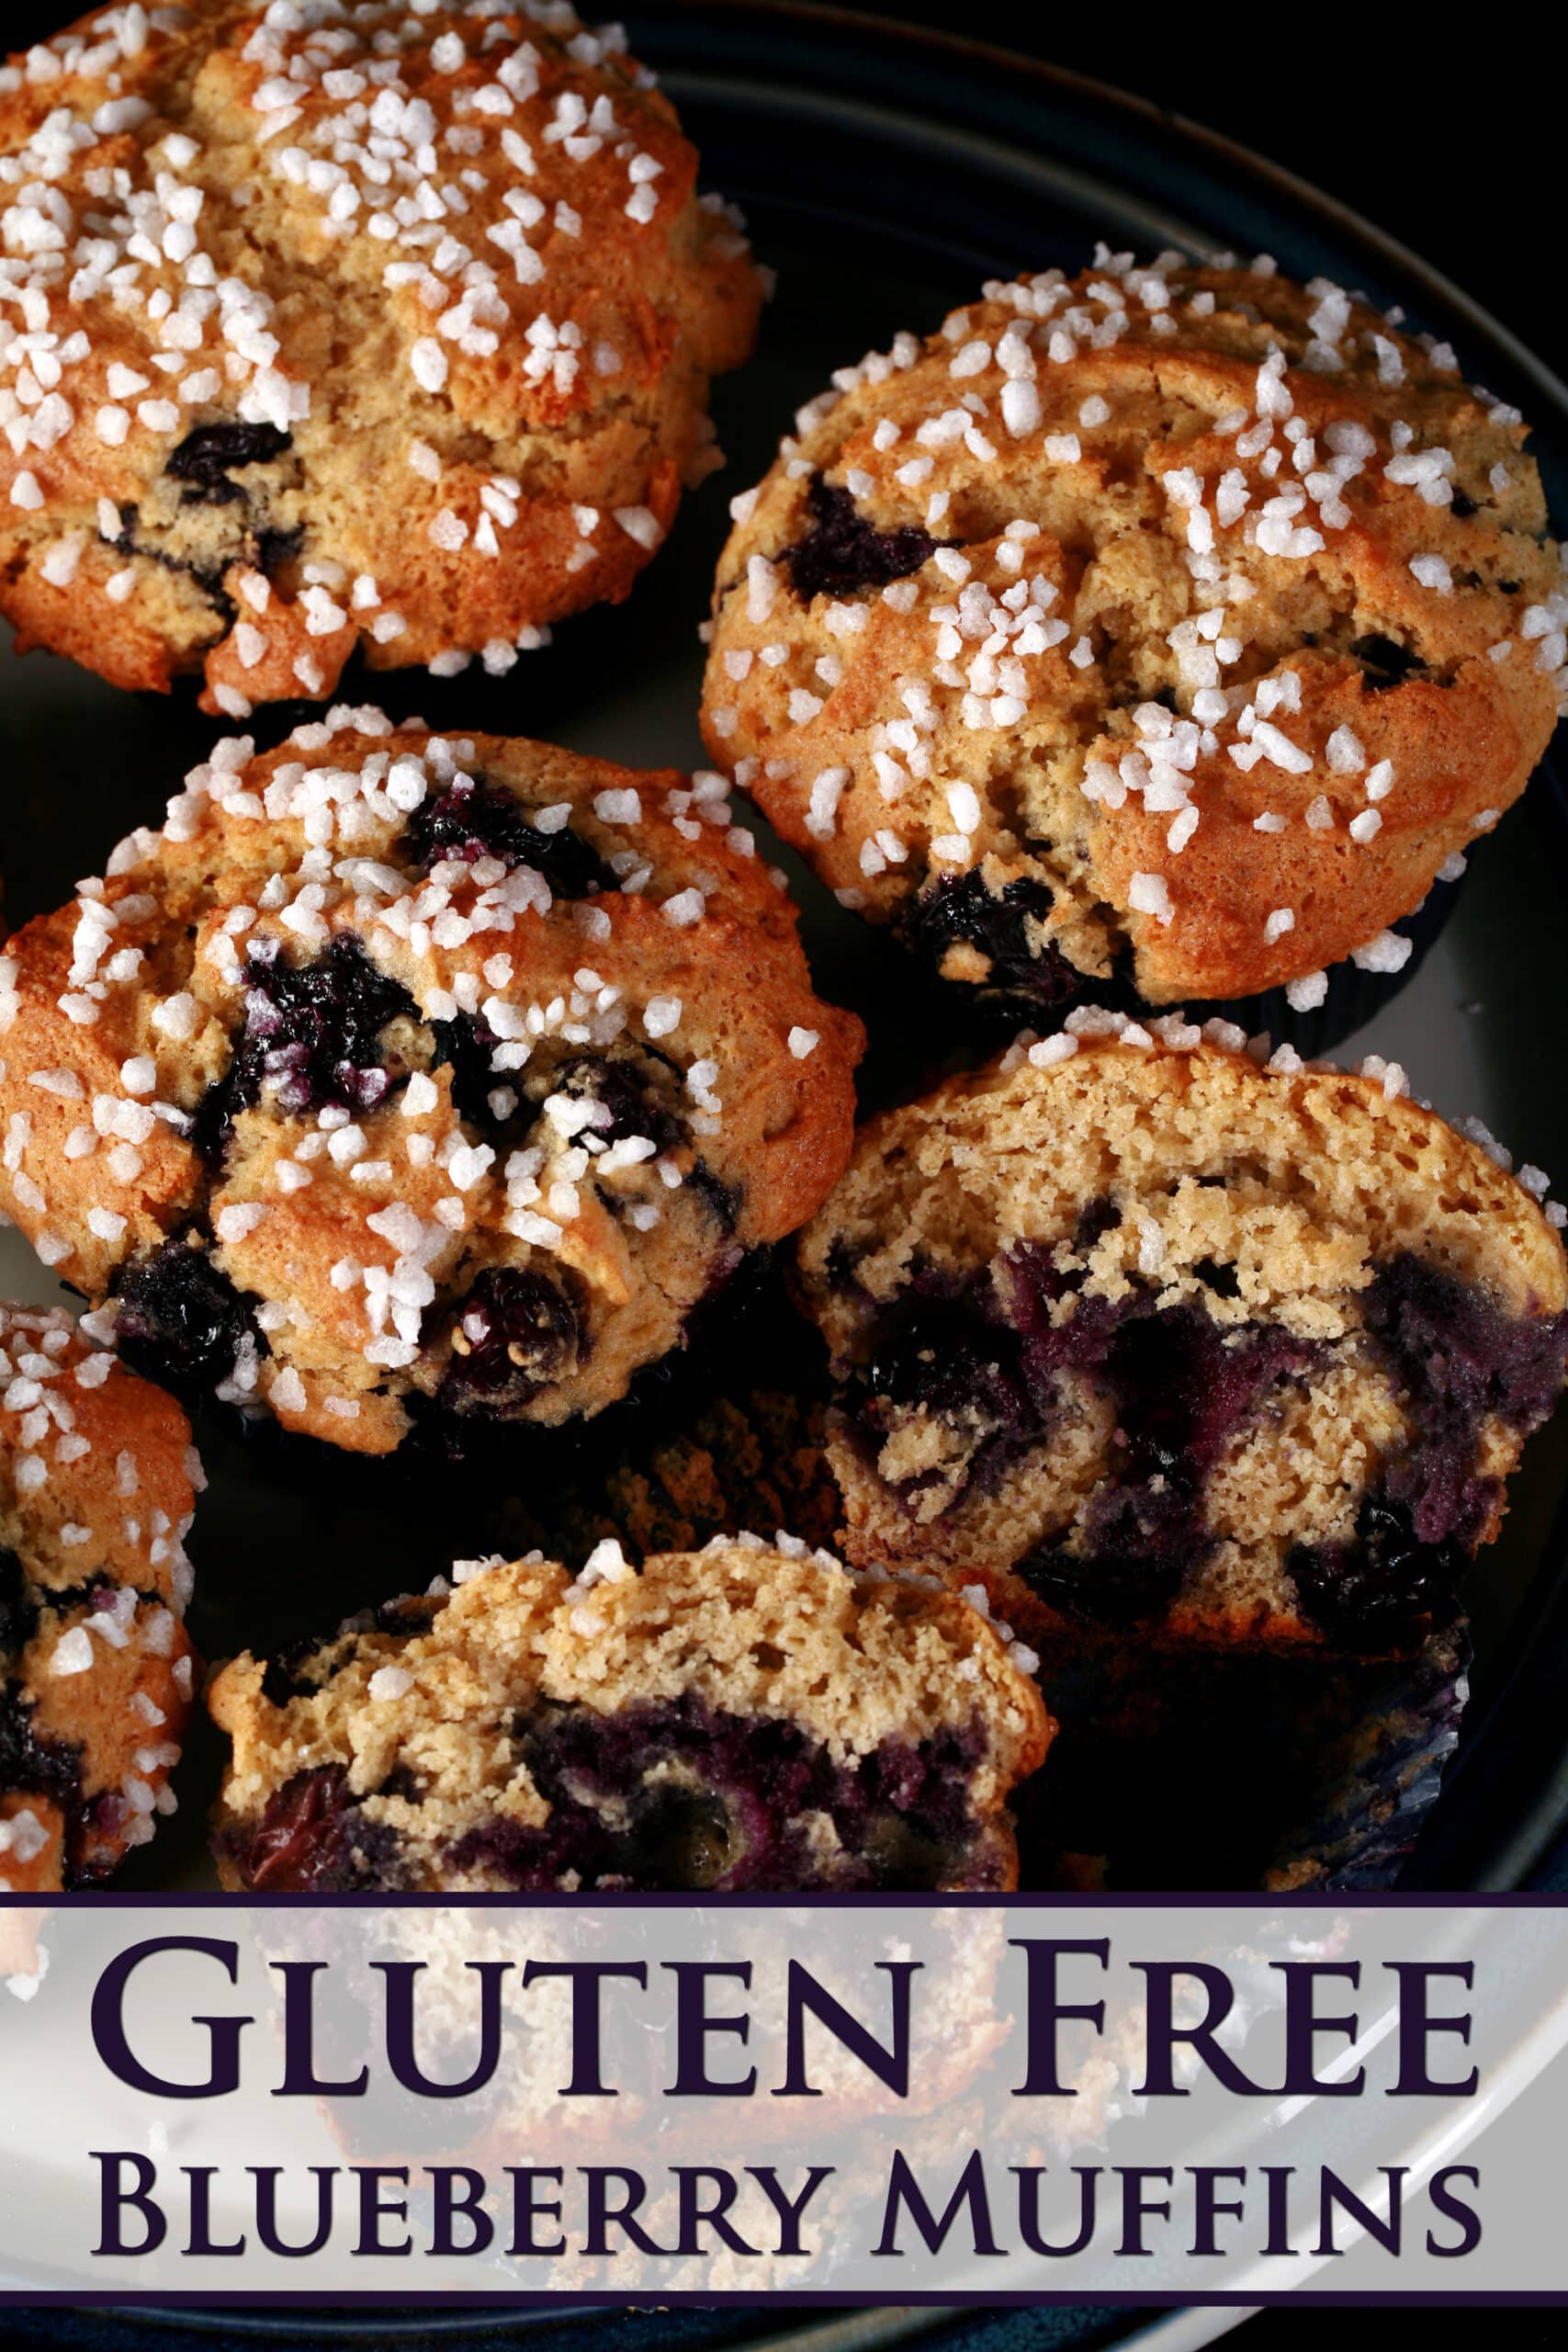 Several sugar topped gluten-free blueberry muffins on a plate.